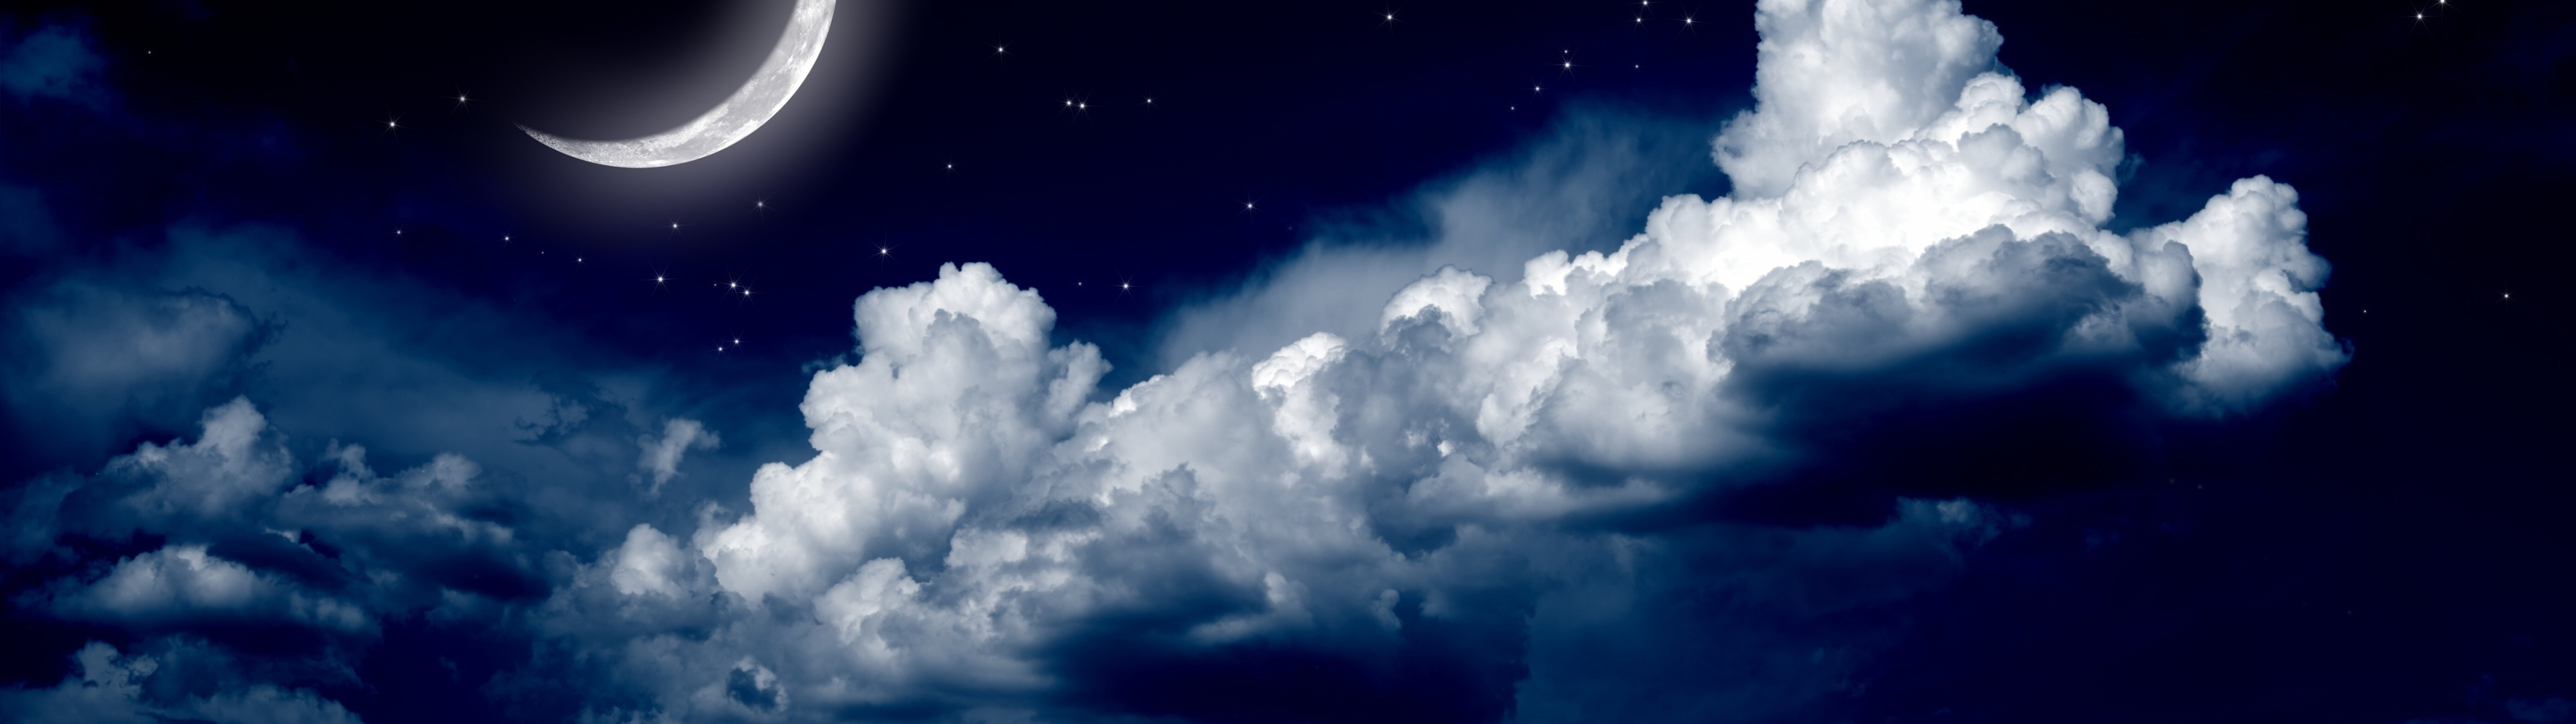 Download wallpaper moon, night, clouds, stars, stunner, section ...